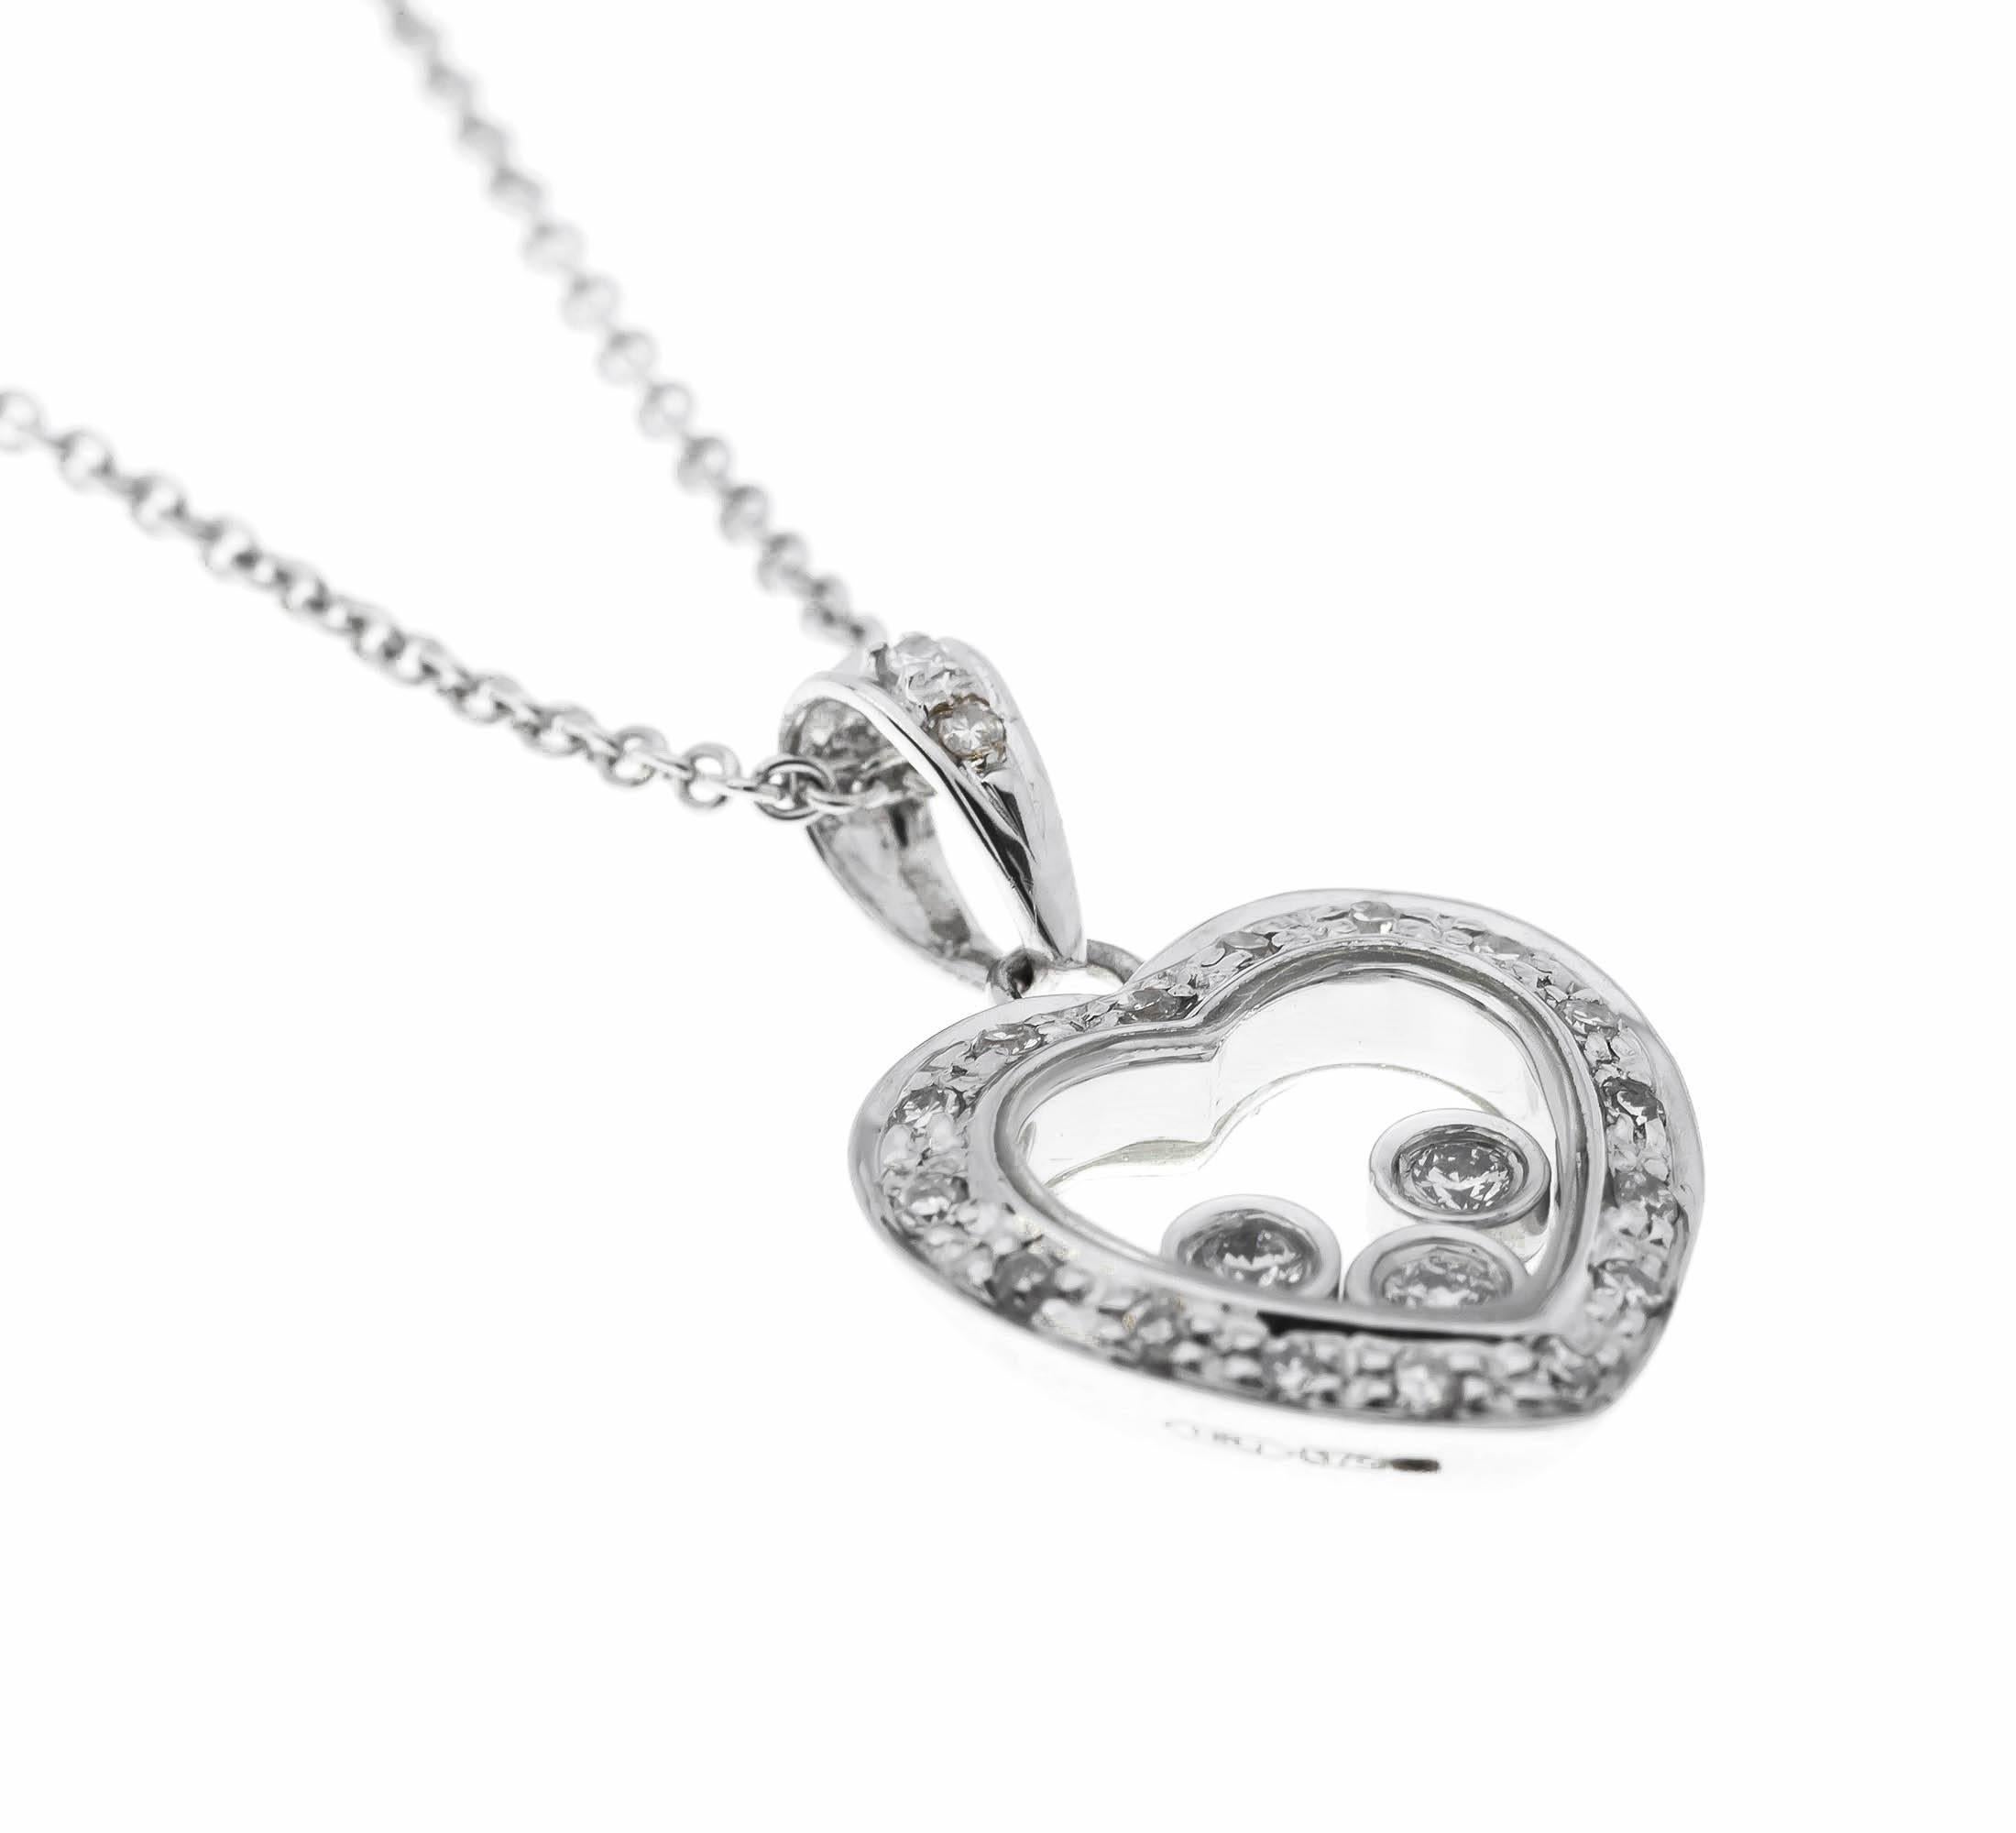 GEMMOLOGIST'S NOTES
This fabulous heart pendant.

A playful design, that has three free-moving floating diamonds, sitting beautifully within a diamond heart surround, suspended from an elegant trace chain.

Like things to match? Pair with the